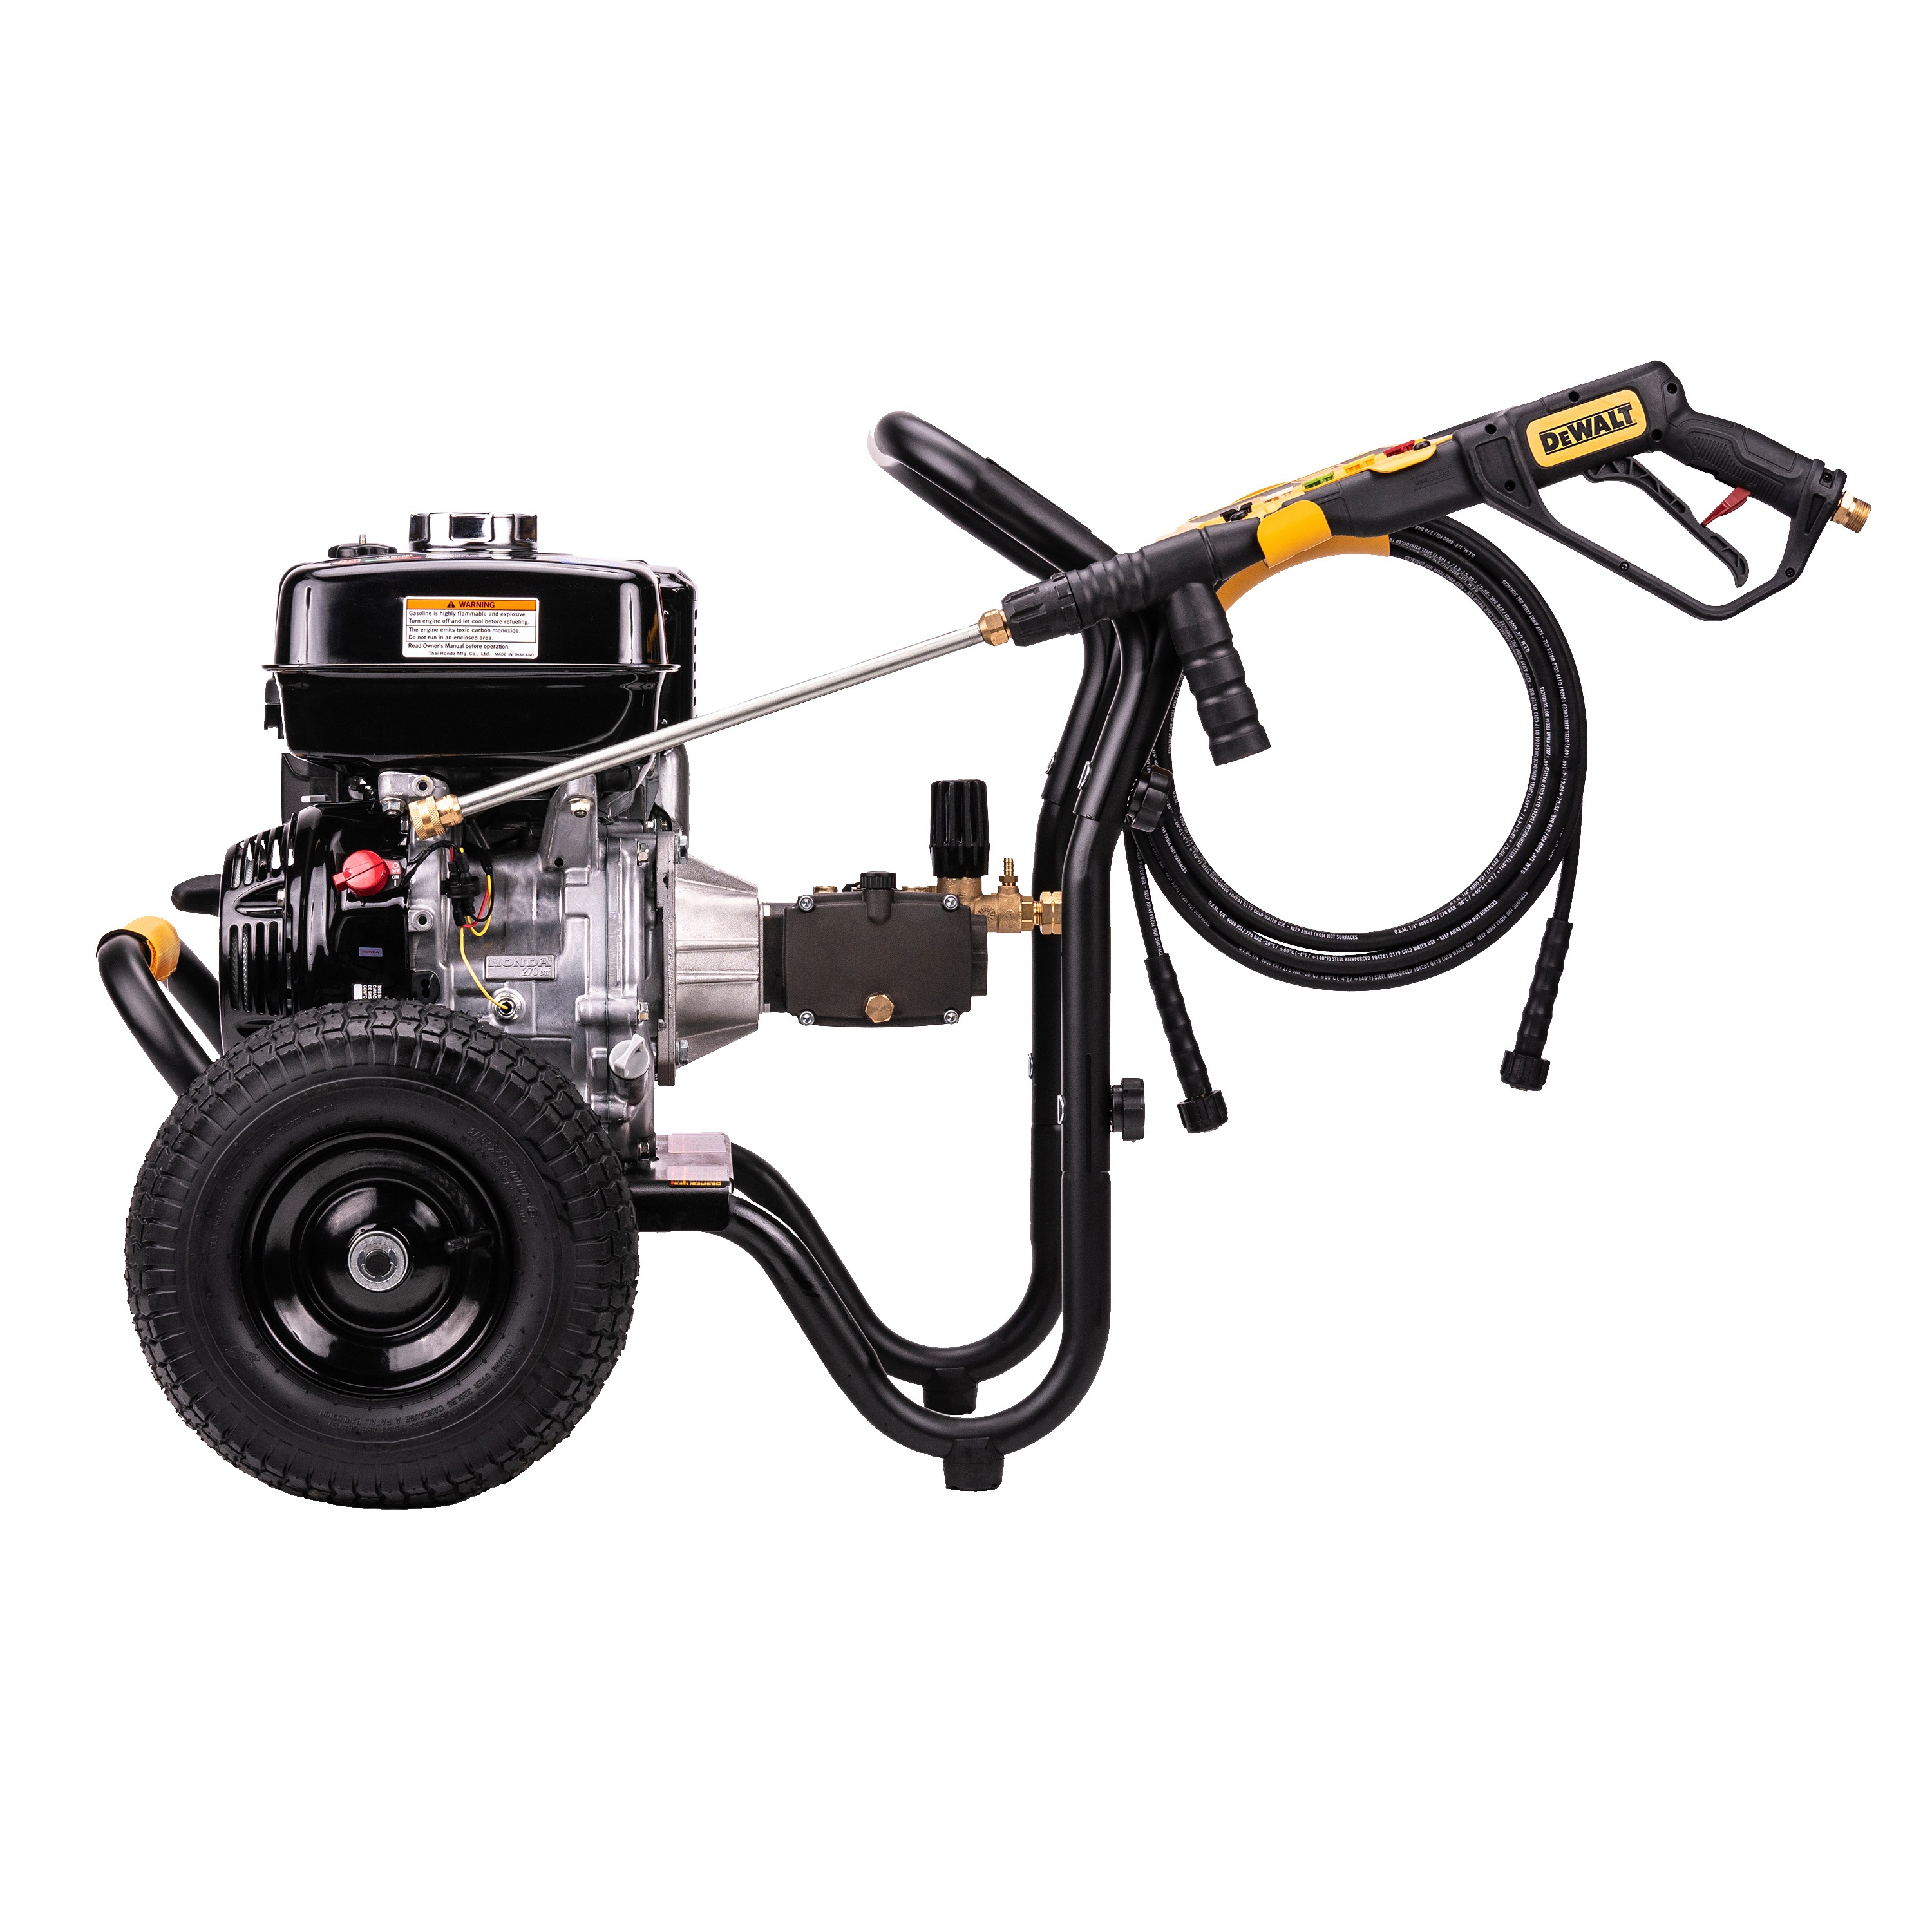 DEWALT - 4000 PSI at 35 GPM Cold Water Gas Pressure Washer Powered by Honda with Triplex Pump - DXPW4035